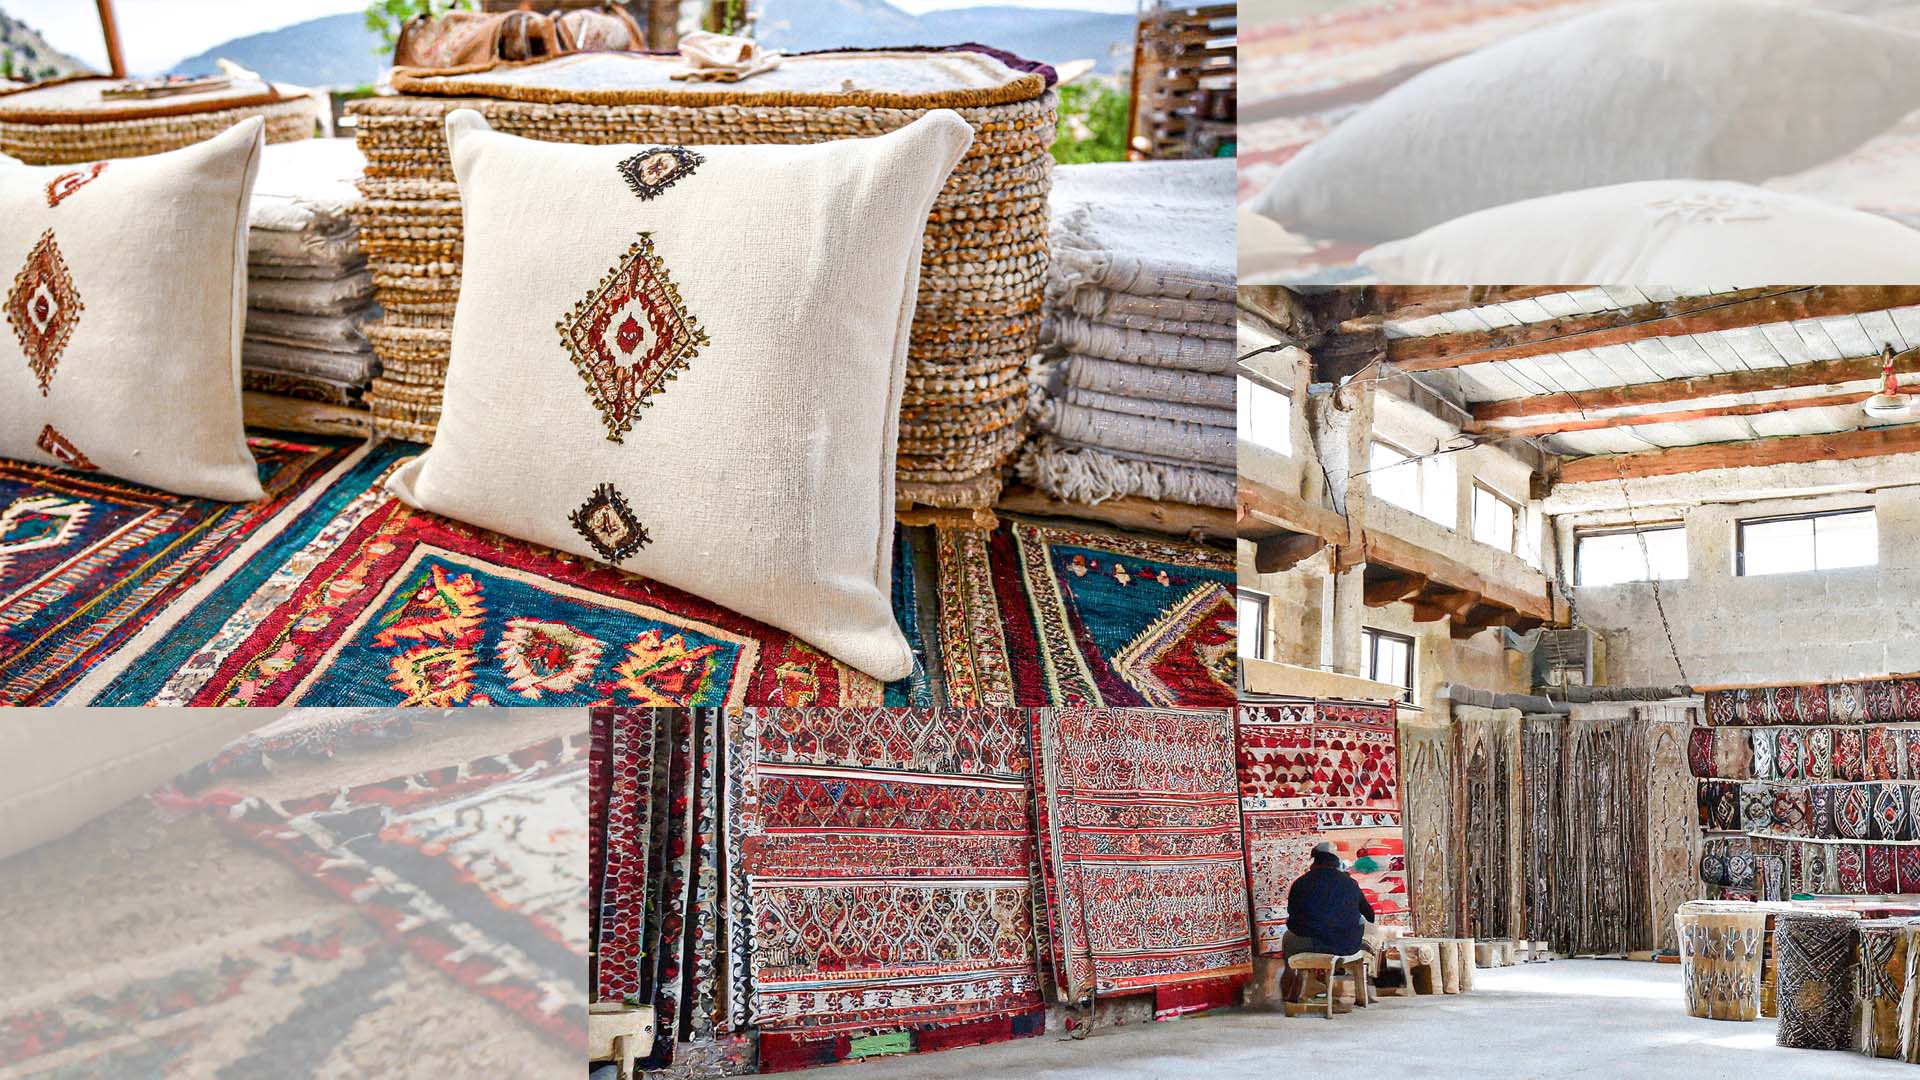 Turkish kilim pillow covers and rugs in village and inside a Turkish textile factory.